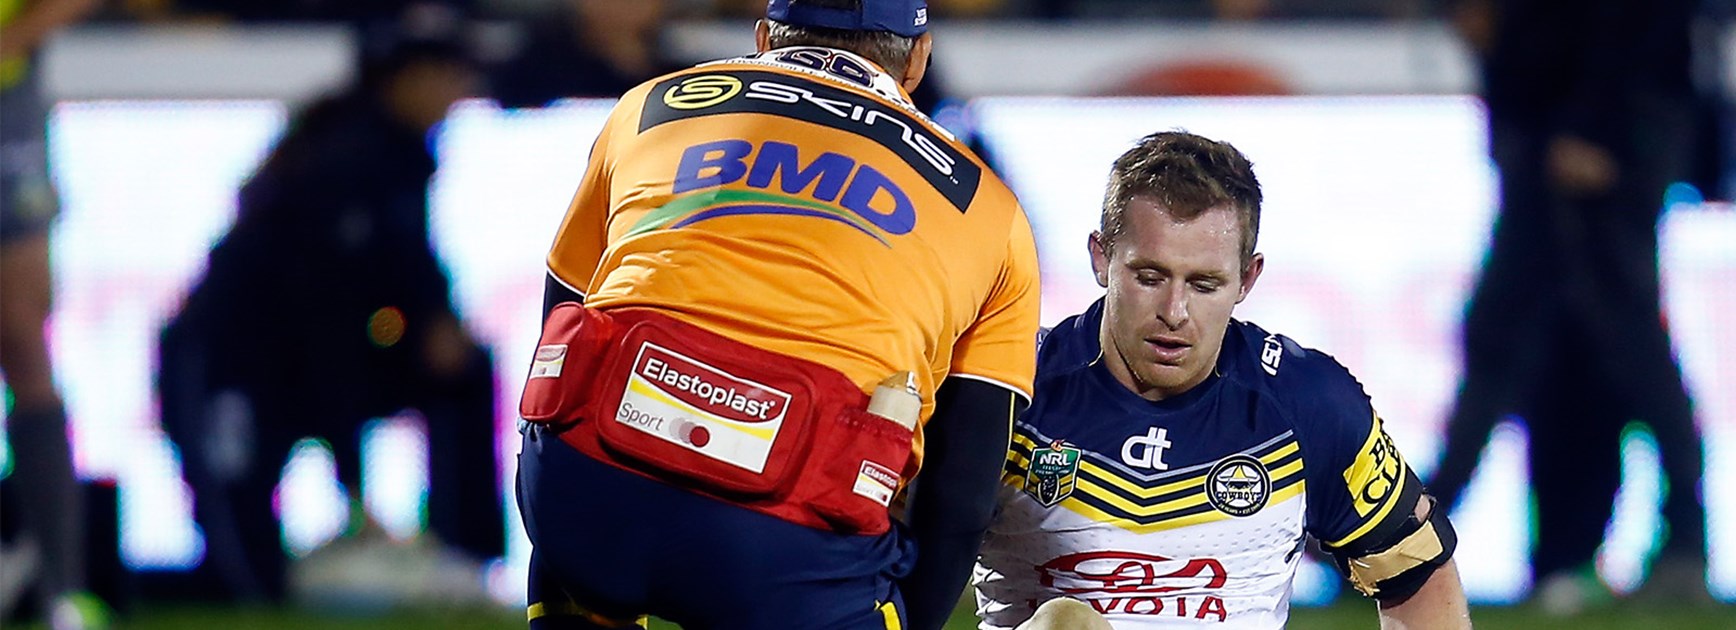 Michael Morgan suffered a high ankle sprain against the Warriors in Round 24.